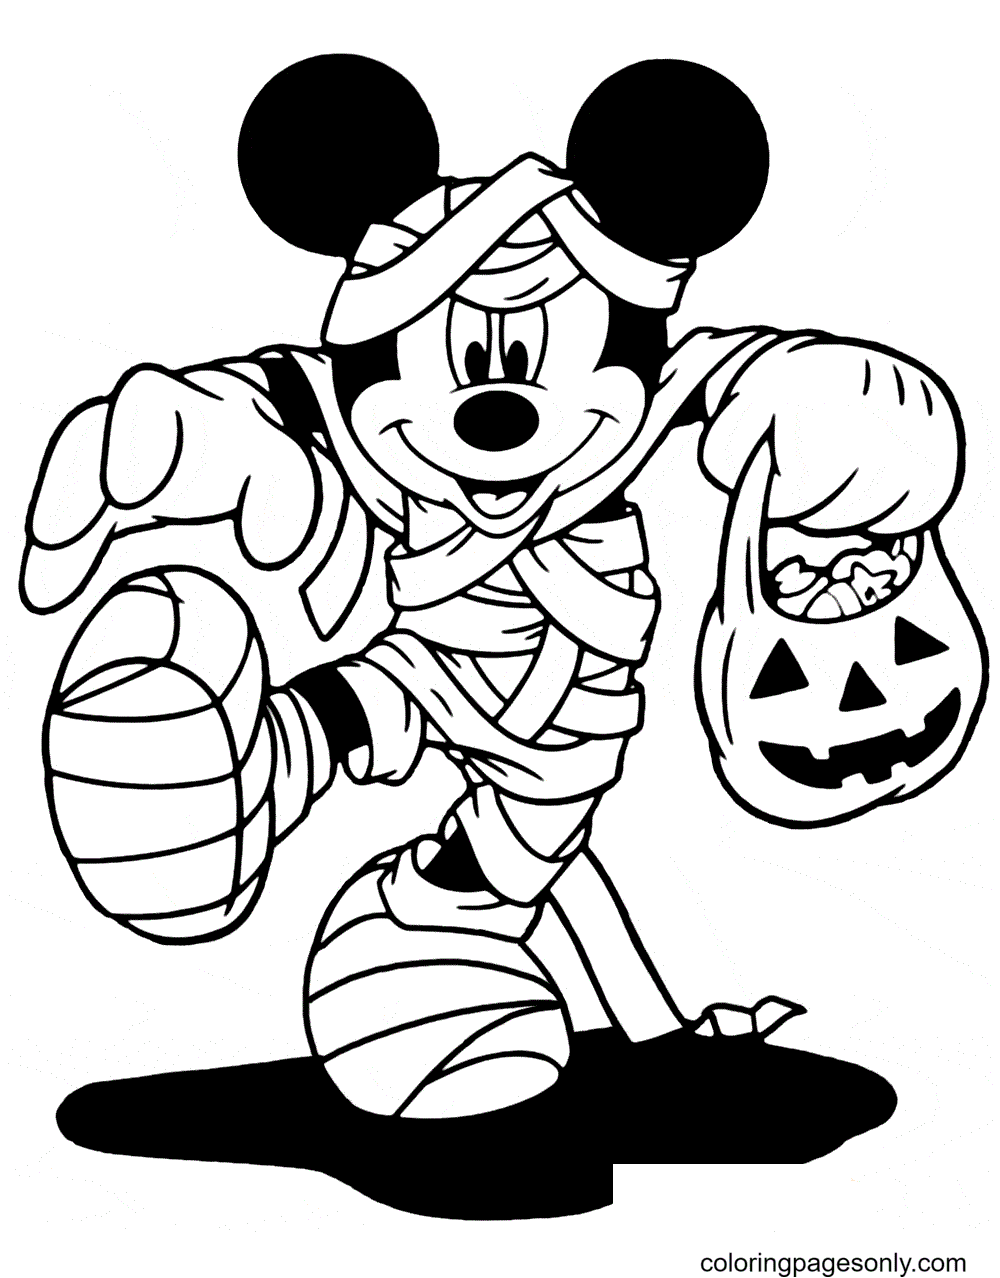 Mummy Mickey on Hallween Coloring Pages